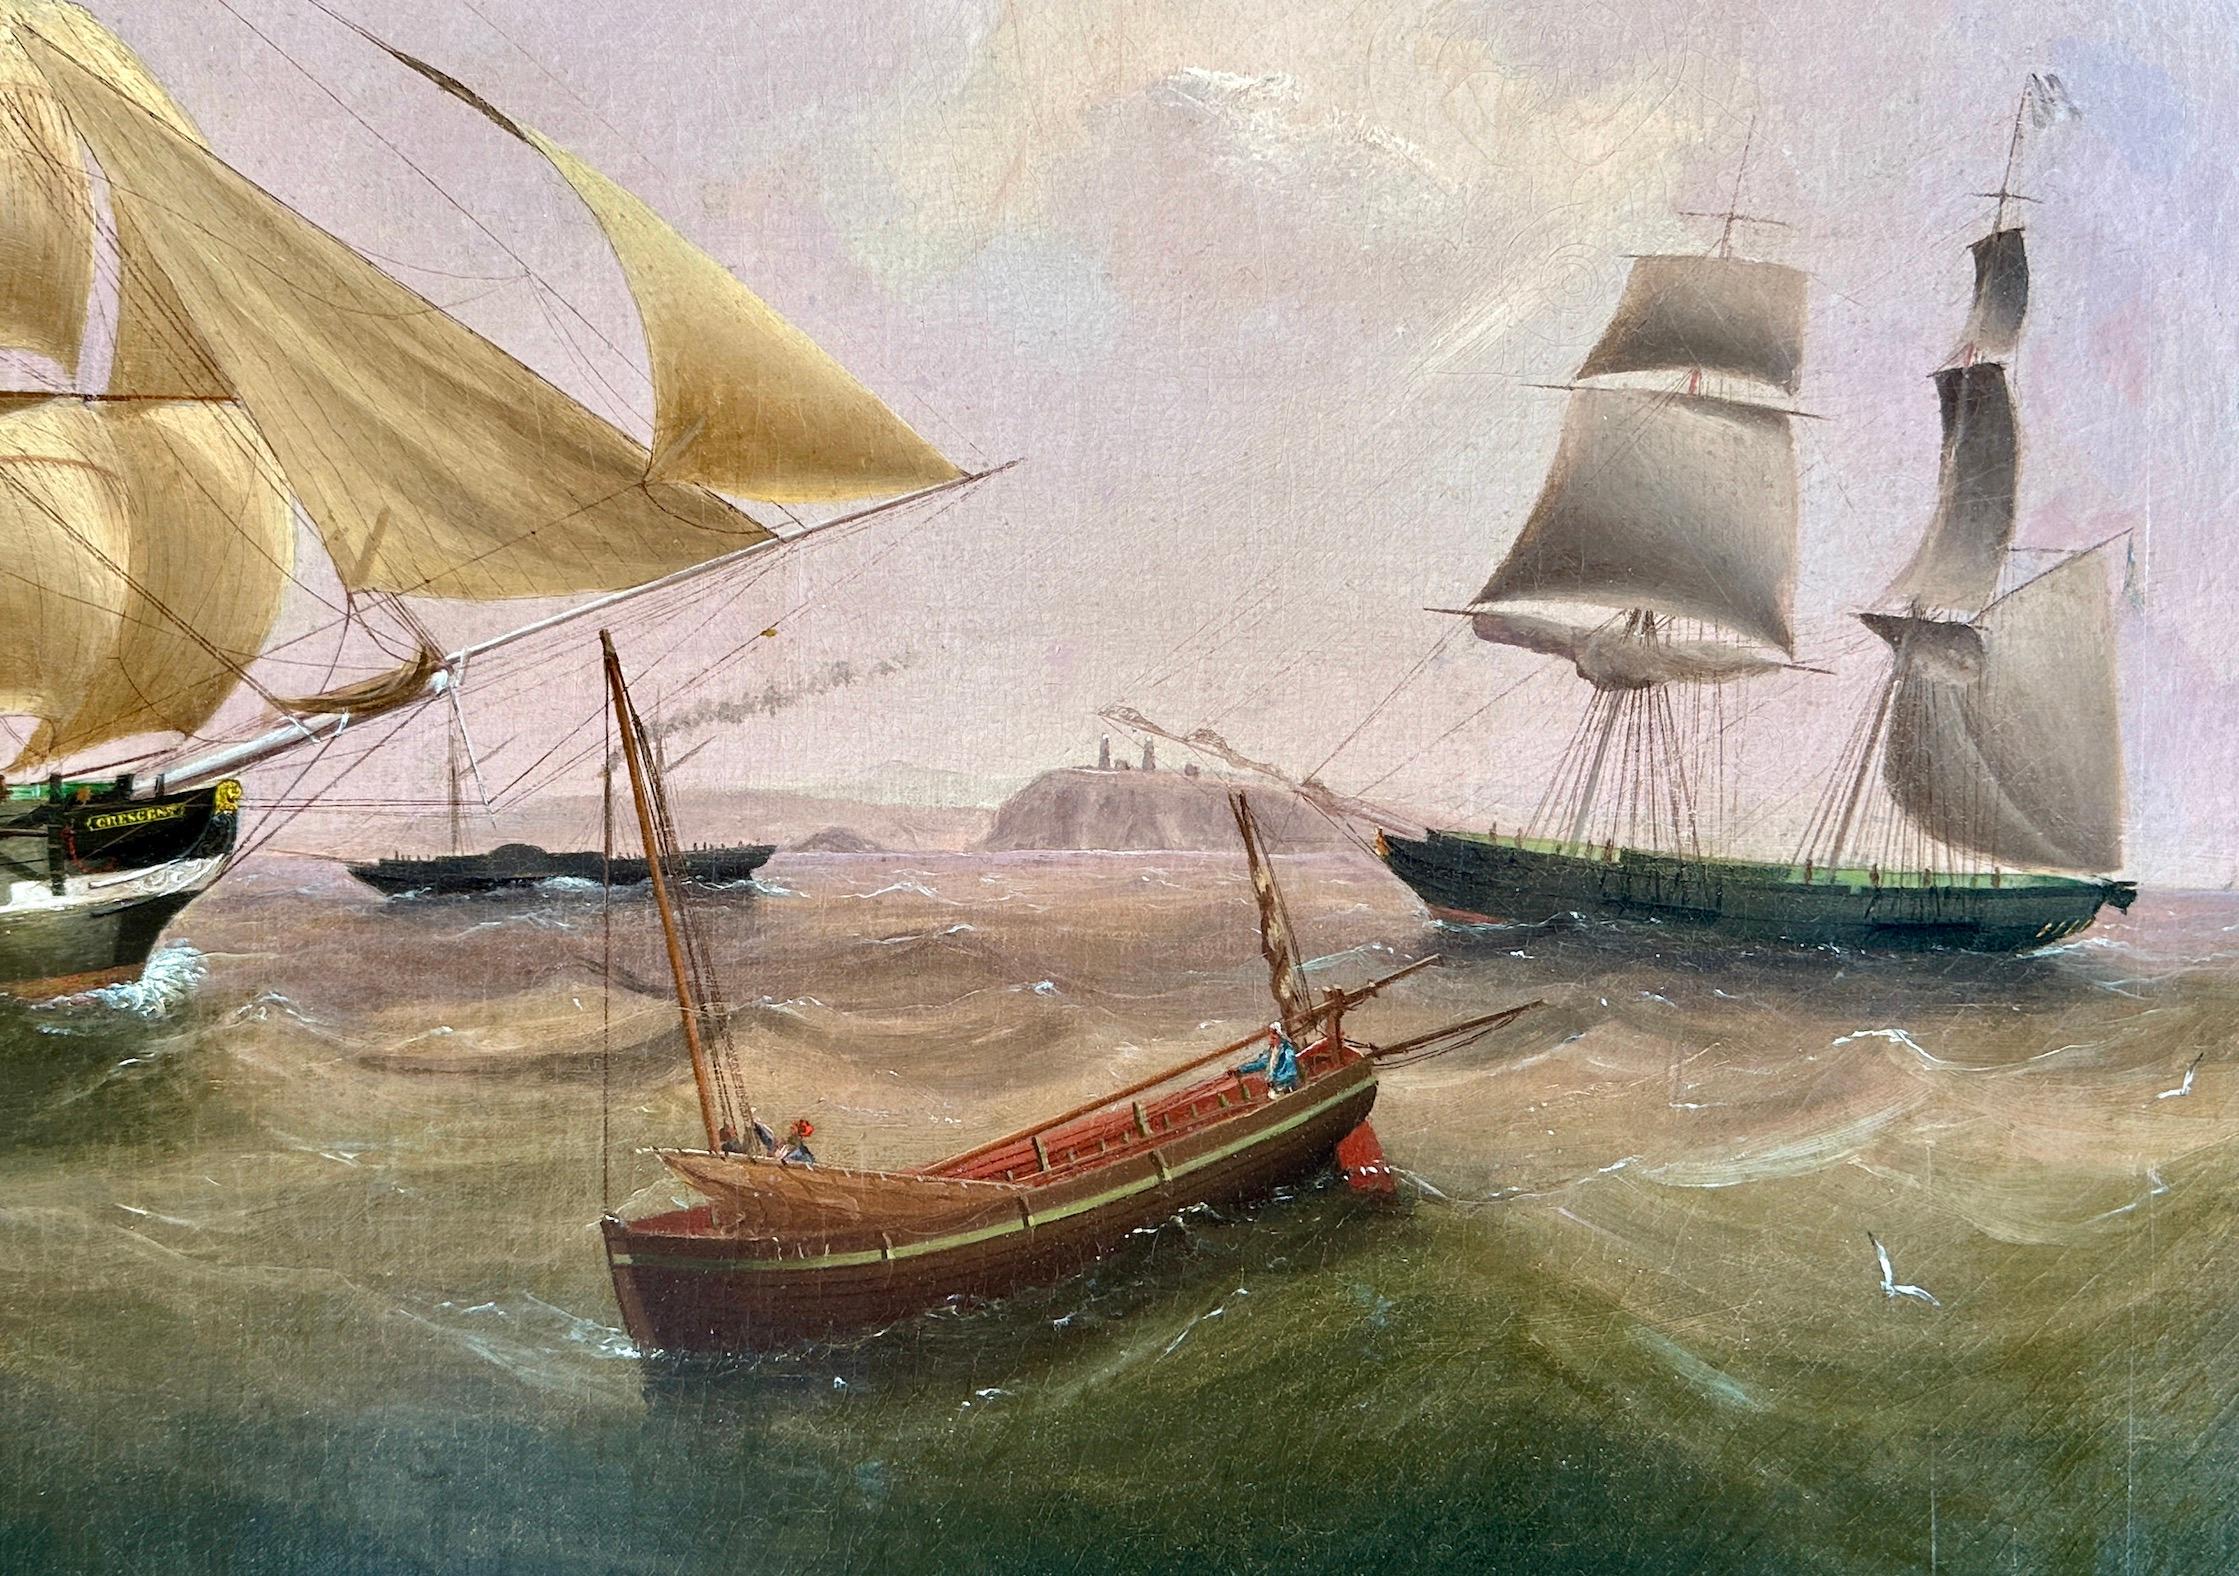 English 19th century portrait of the Clipper ship Crescent in full sail.

Acquiring a 19th-century English portrait of a clipper ship is more than just adding a painting to your collection; it's an invitation to embark on a journey through maritime